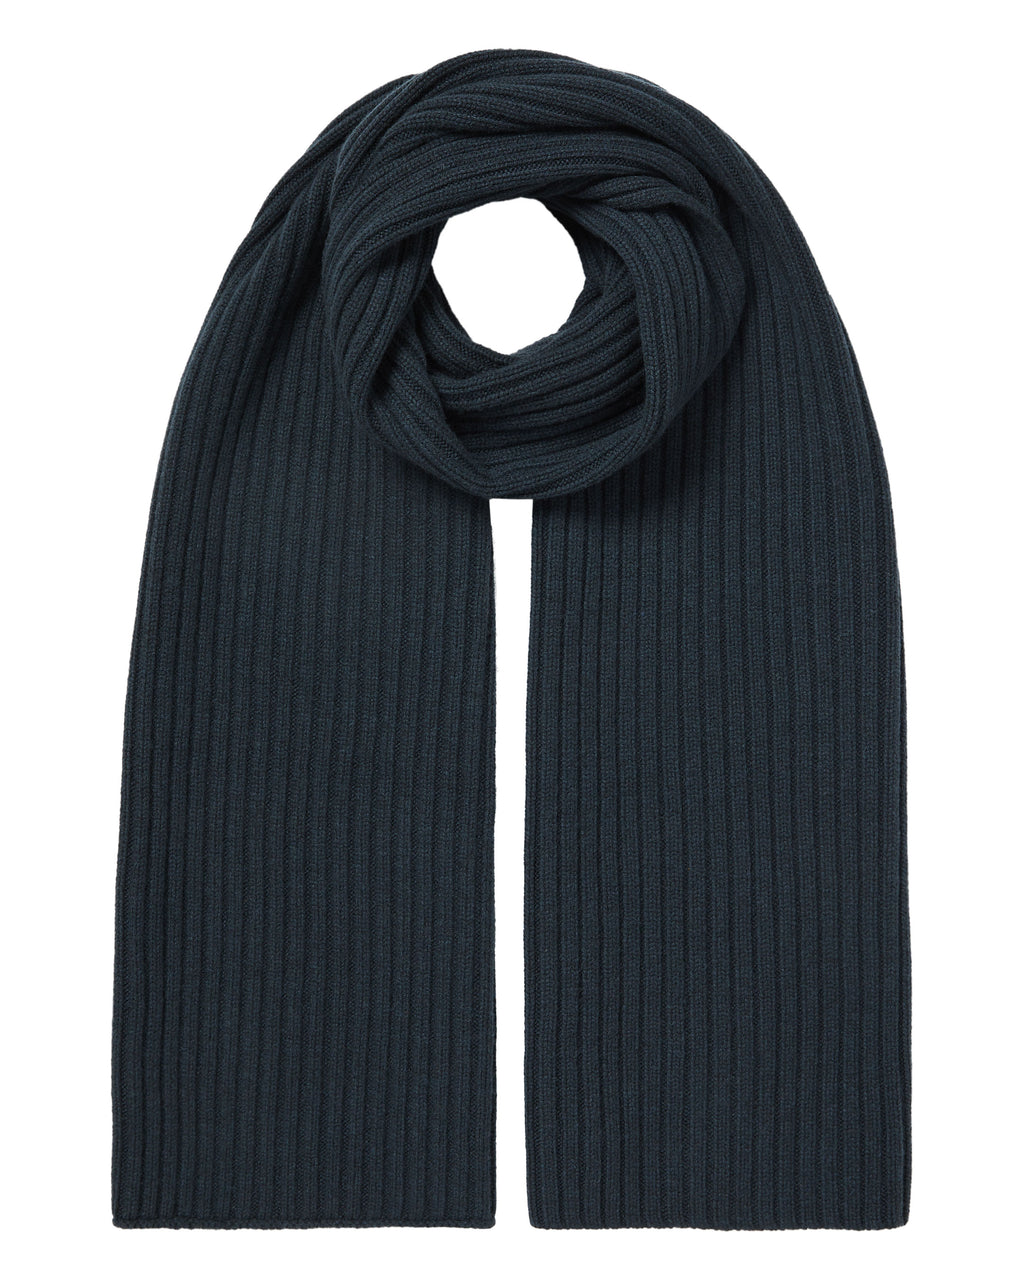 Mens 100% Cashmere Scarf 22×72 Inches Long Soft Non-Irritating